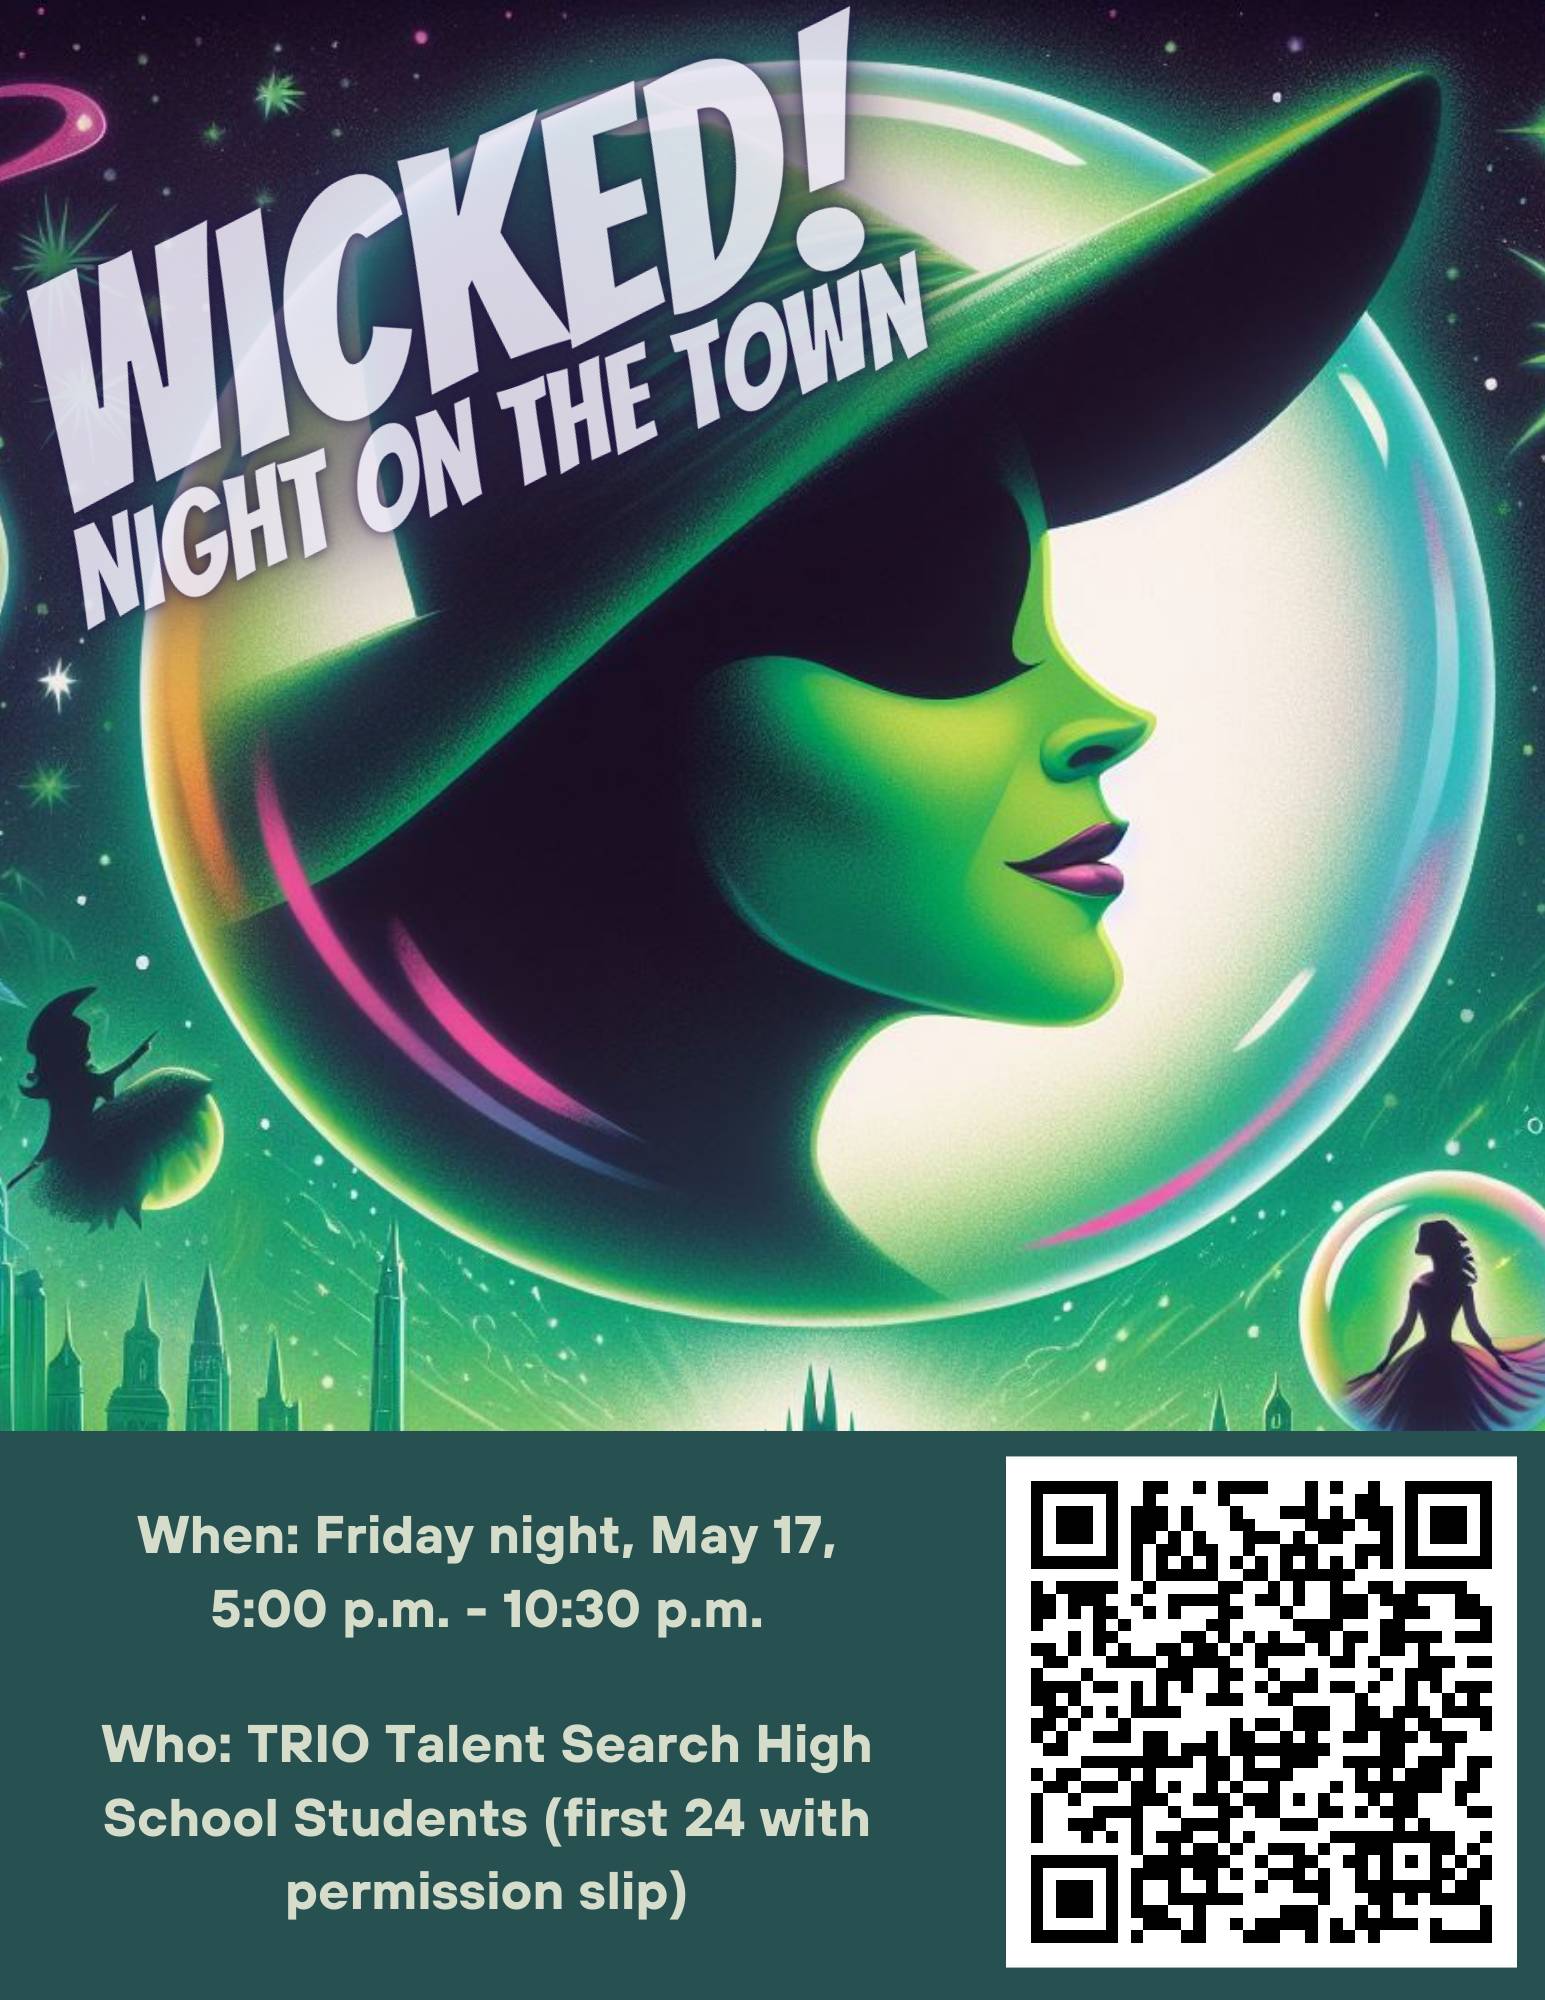 Night on the Town, Friday May 17, 5:00 PM to 10:30 PM, open to TRIO ETS students (the first 24 to fill out permission slips)